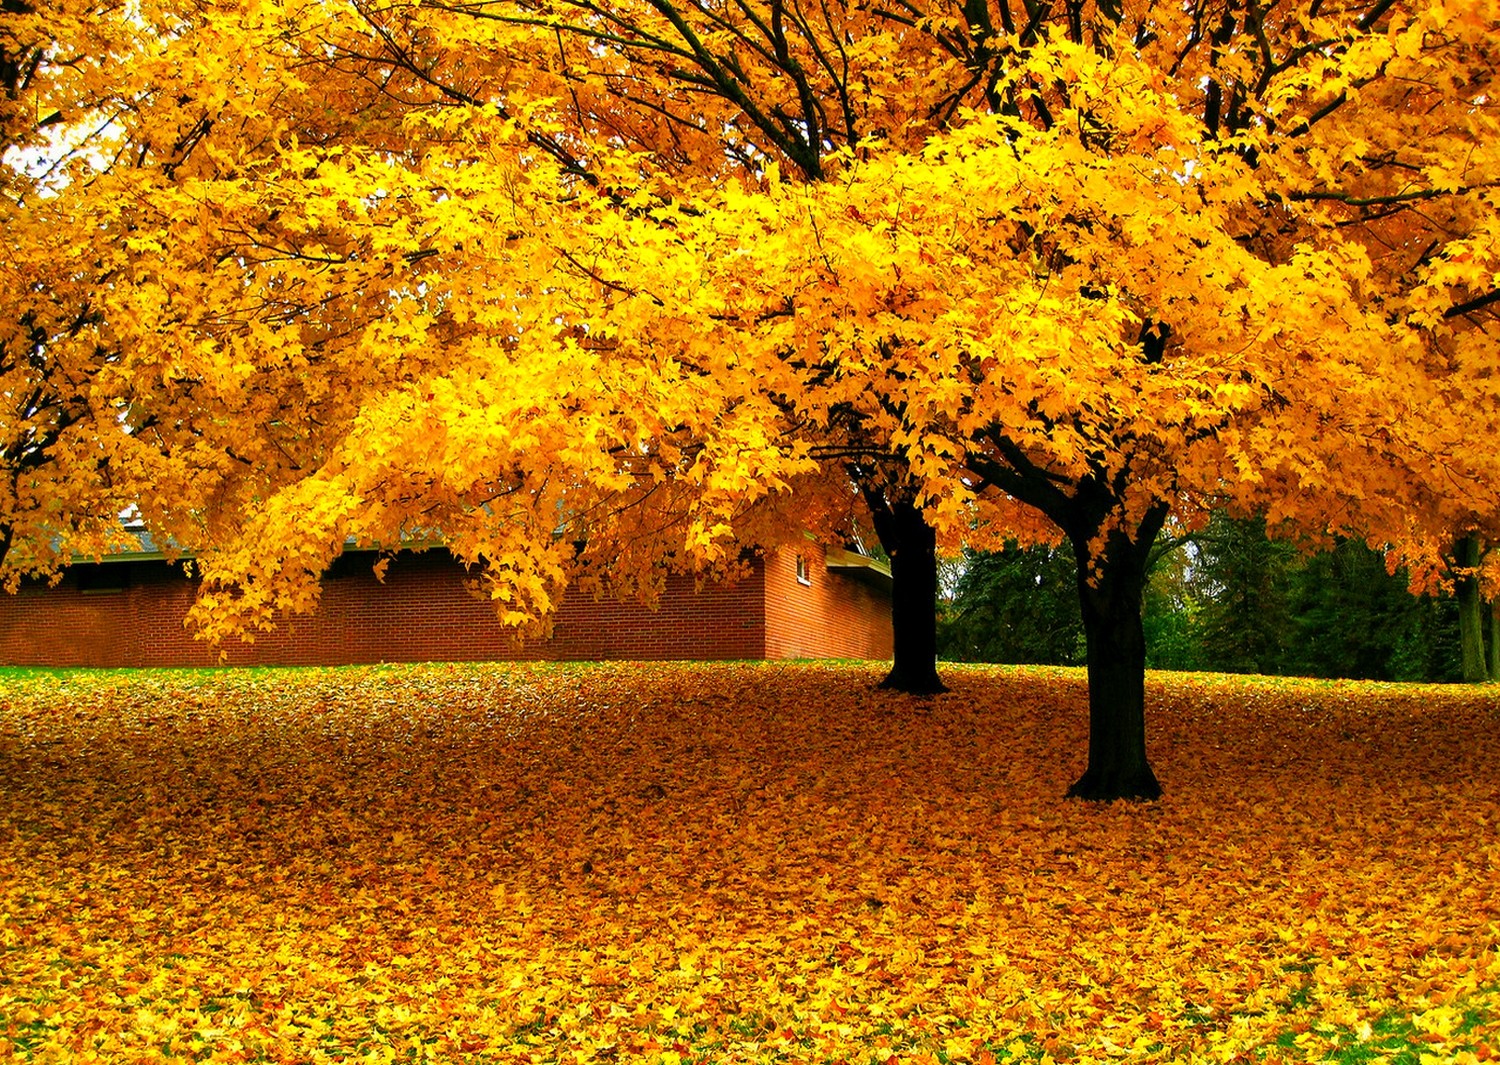 General 1500x1065 nature trees leaves yellow fall house grass fallen leaves